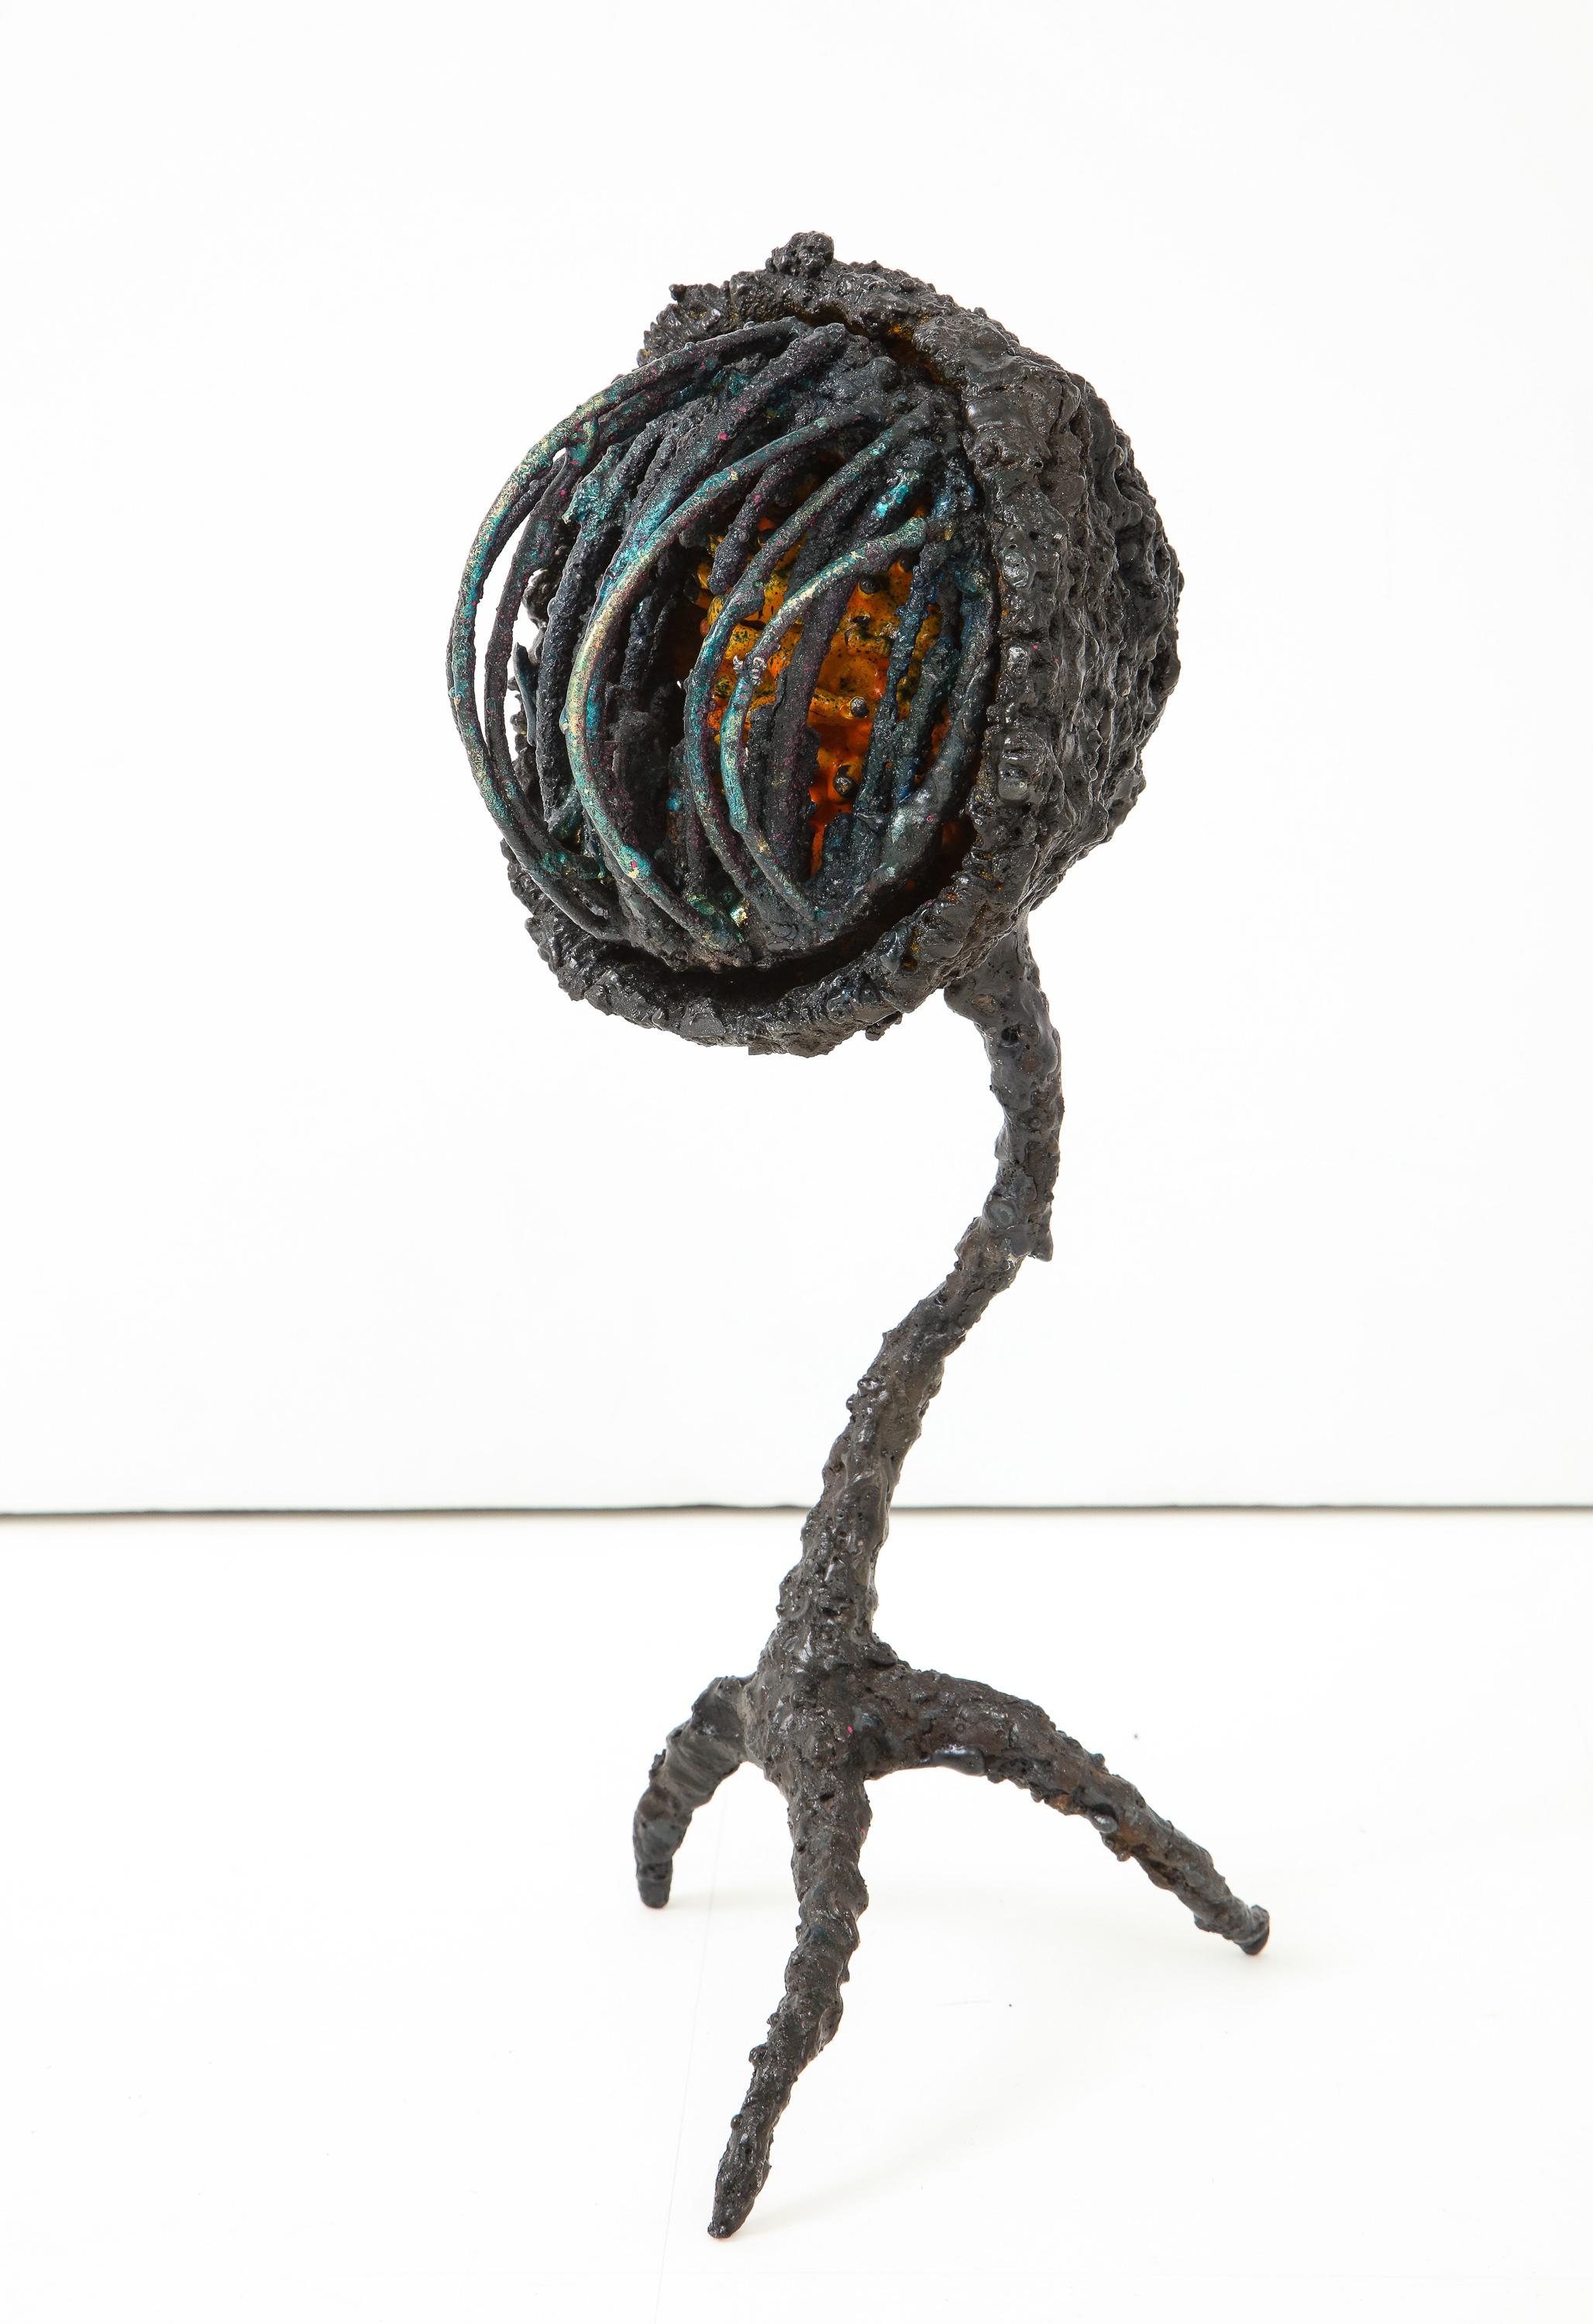 “Coil Box,” a dynamic abstract sculpture of torch-cut steel with glass enamel and dyed bronze, by American artist James Bearden. From his Woven series., 2018. The quasi-anthropomorphic, quasi-mechanical form radiates a dramatic energy from its talon